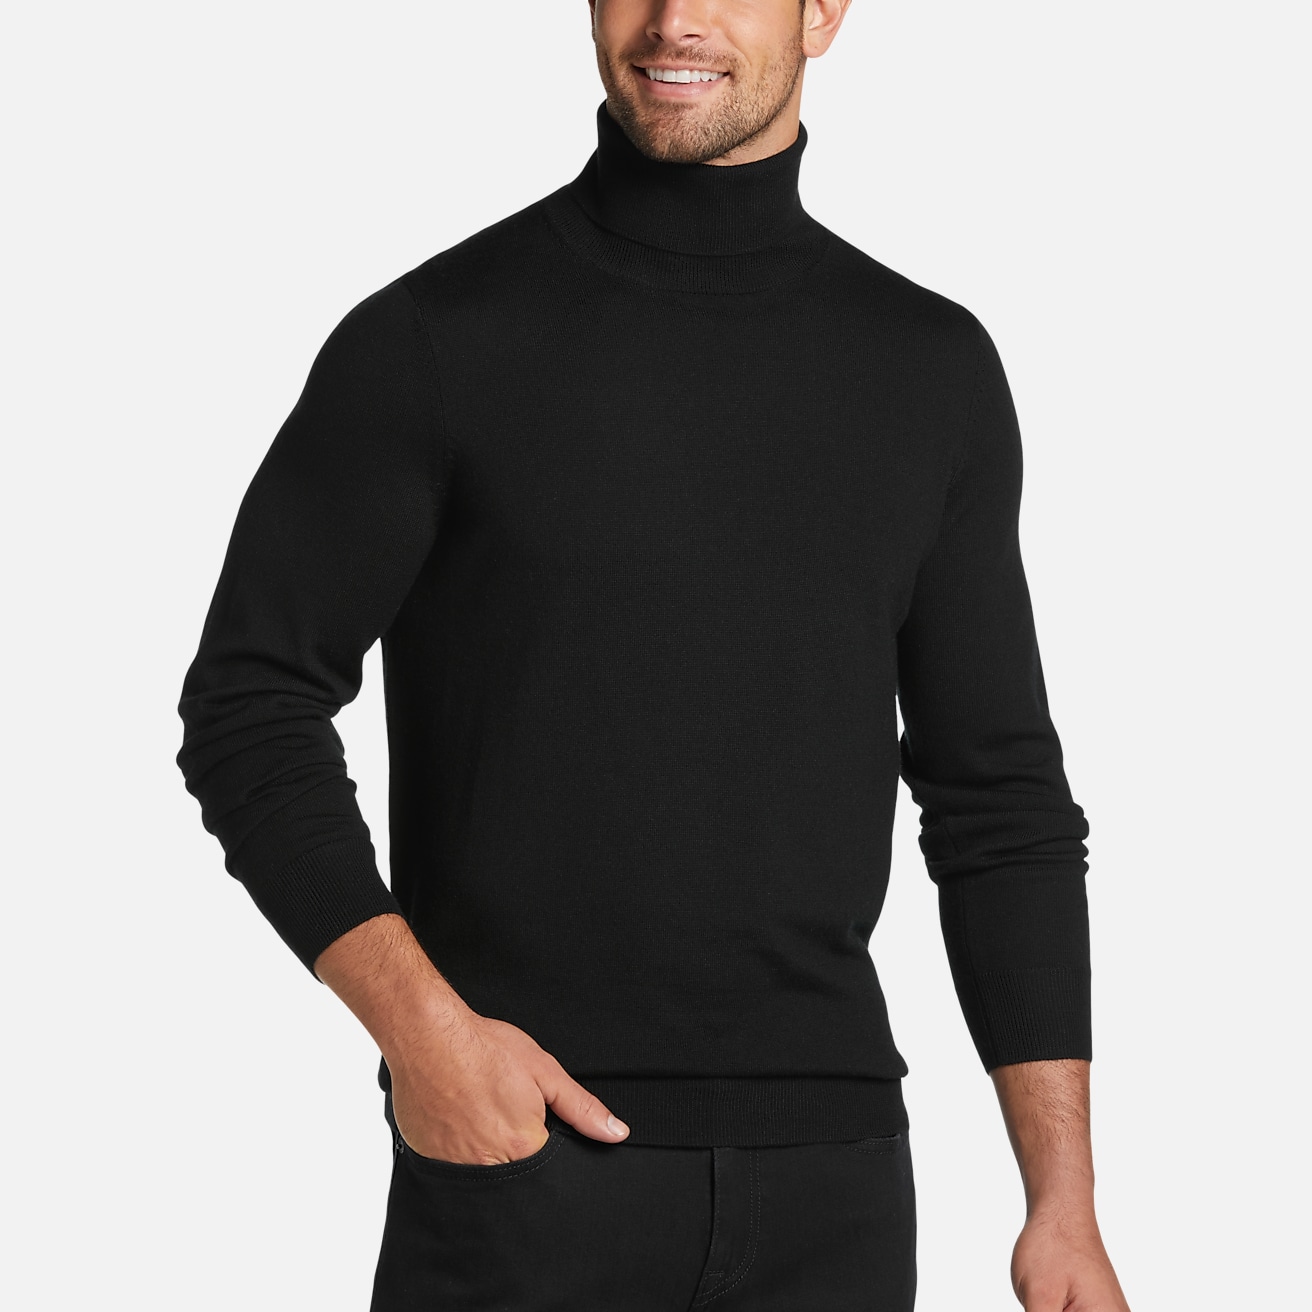 https://image.menswearhouse.com/is/image/TMW/TMW_6LLK_02_JOS_A_BANK_TRAVELER_SWEATERS_BLACK_MAIN?imPolicy=pdp-mob-2x